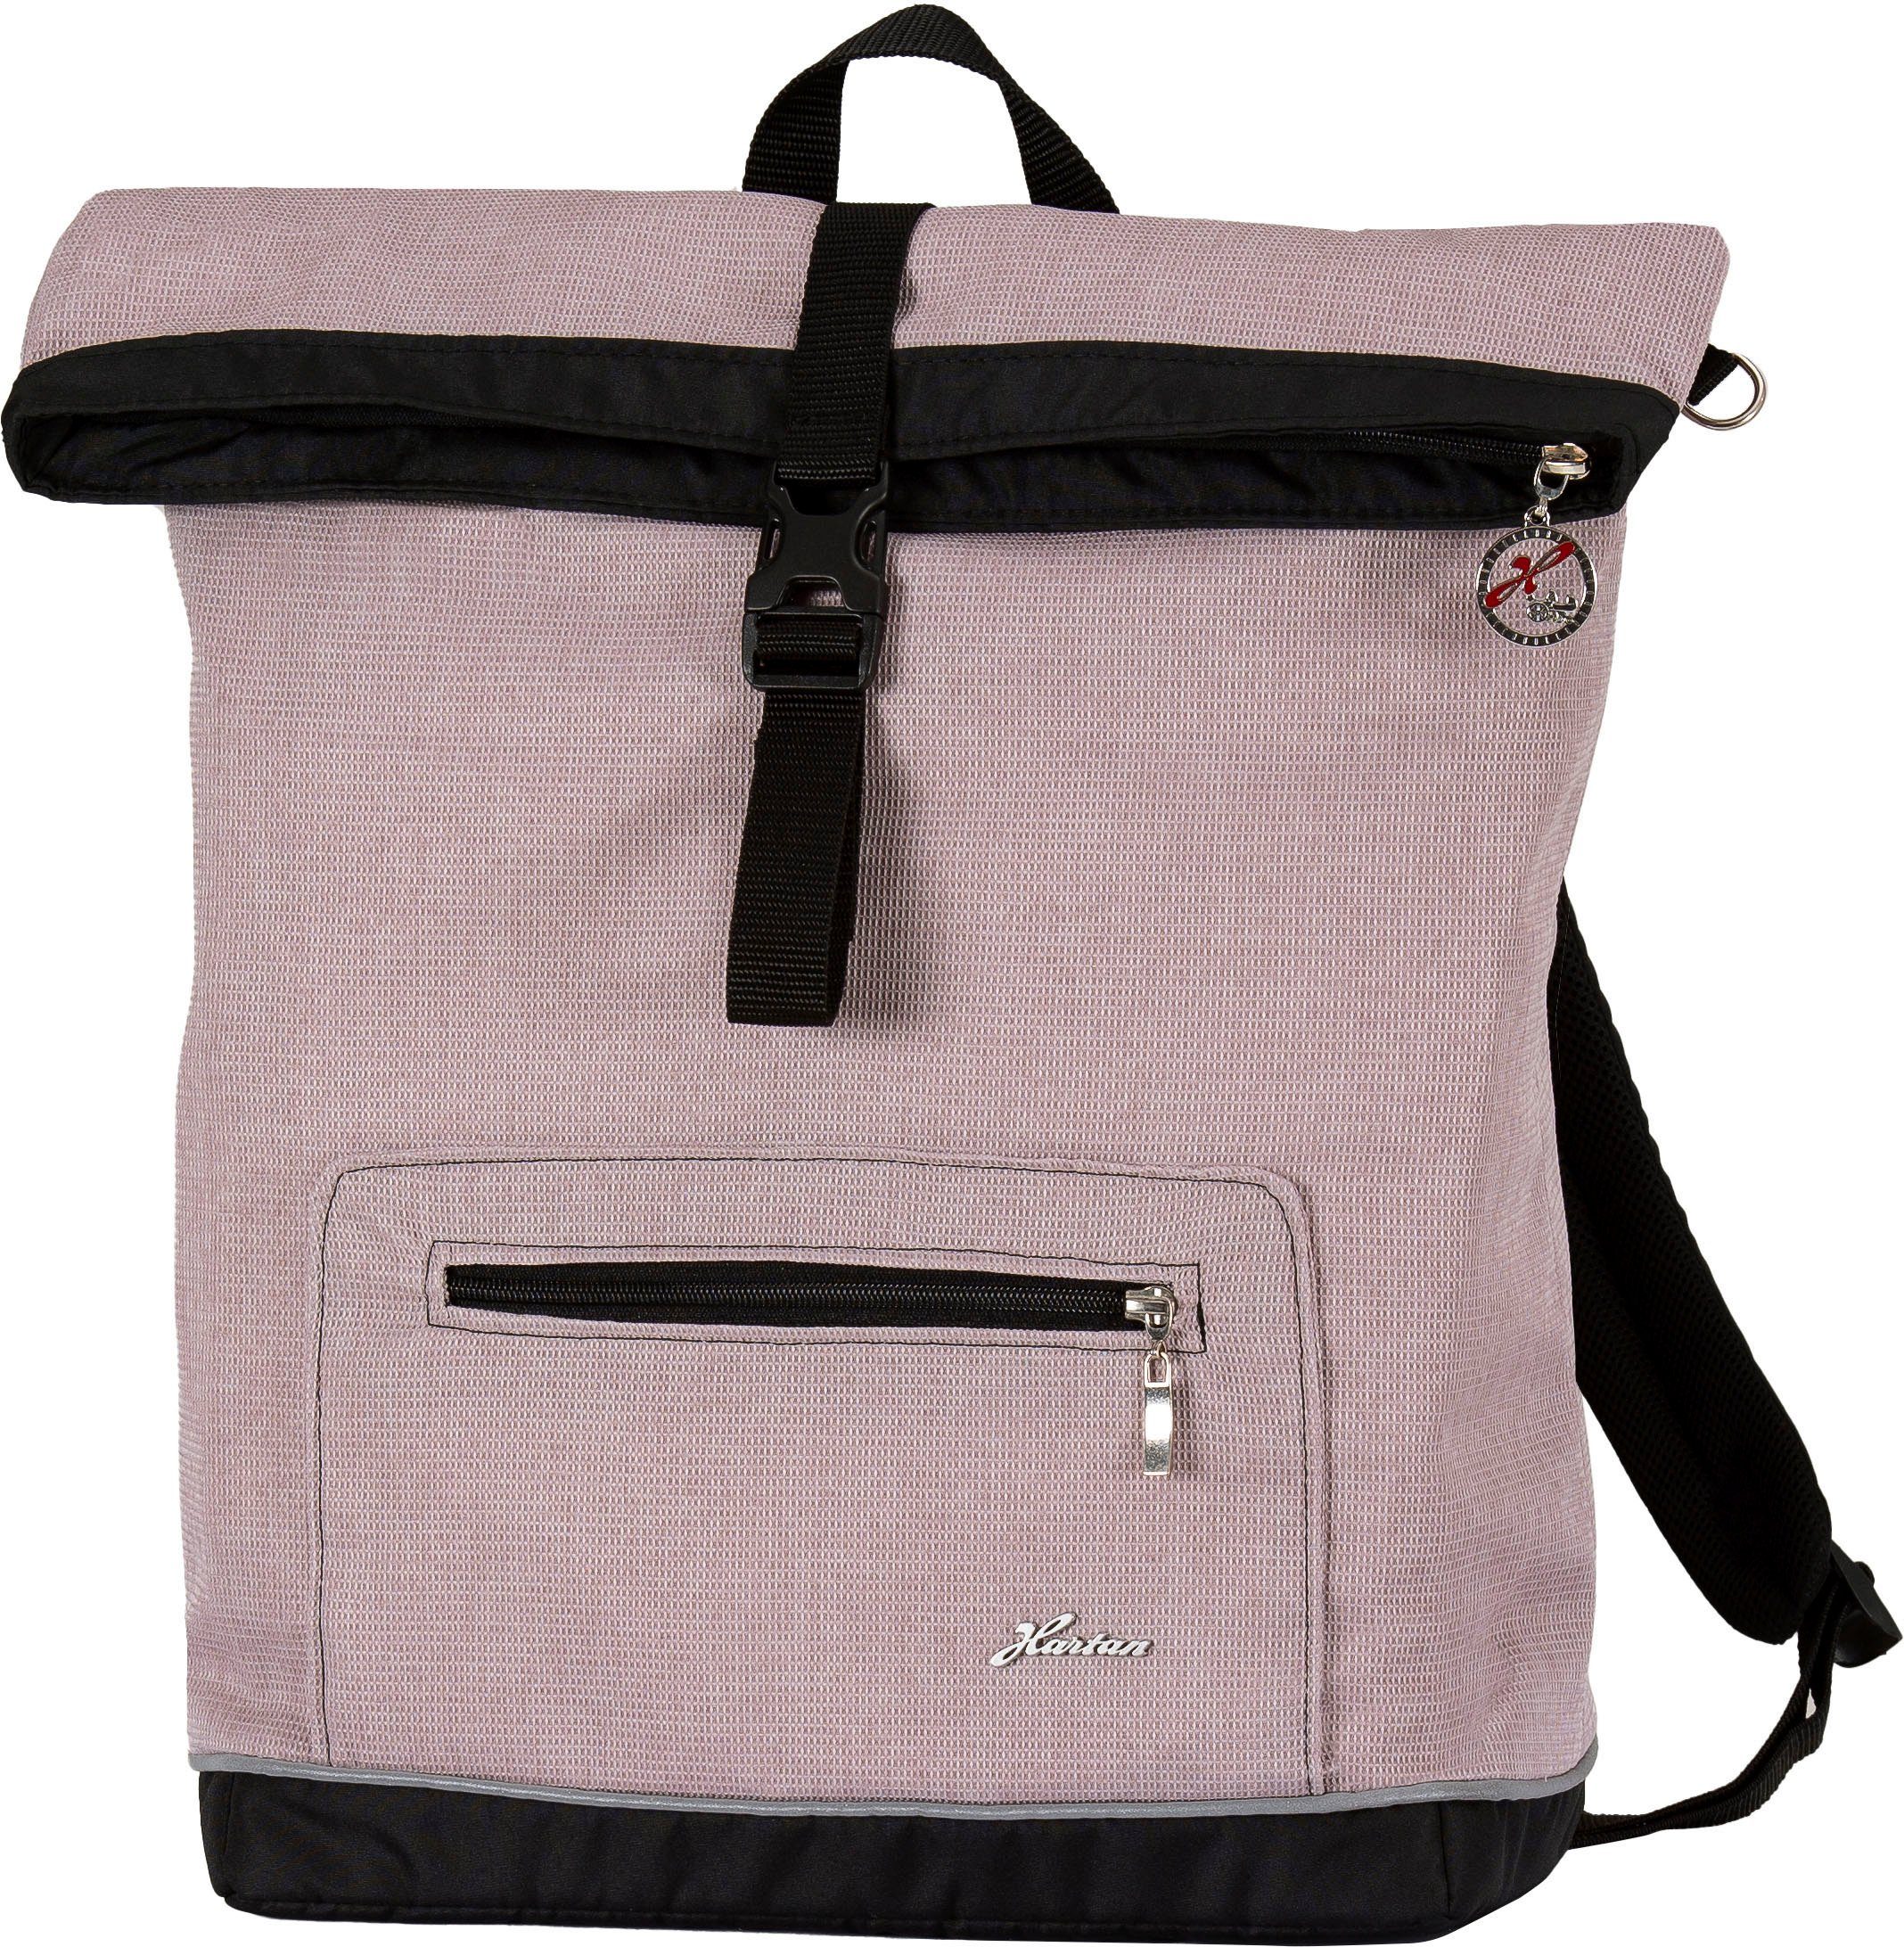 Hartan Wickelrucksack Space bag - Made birds Thermofach; mit Collection, in Casual rosy Germany